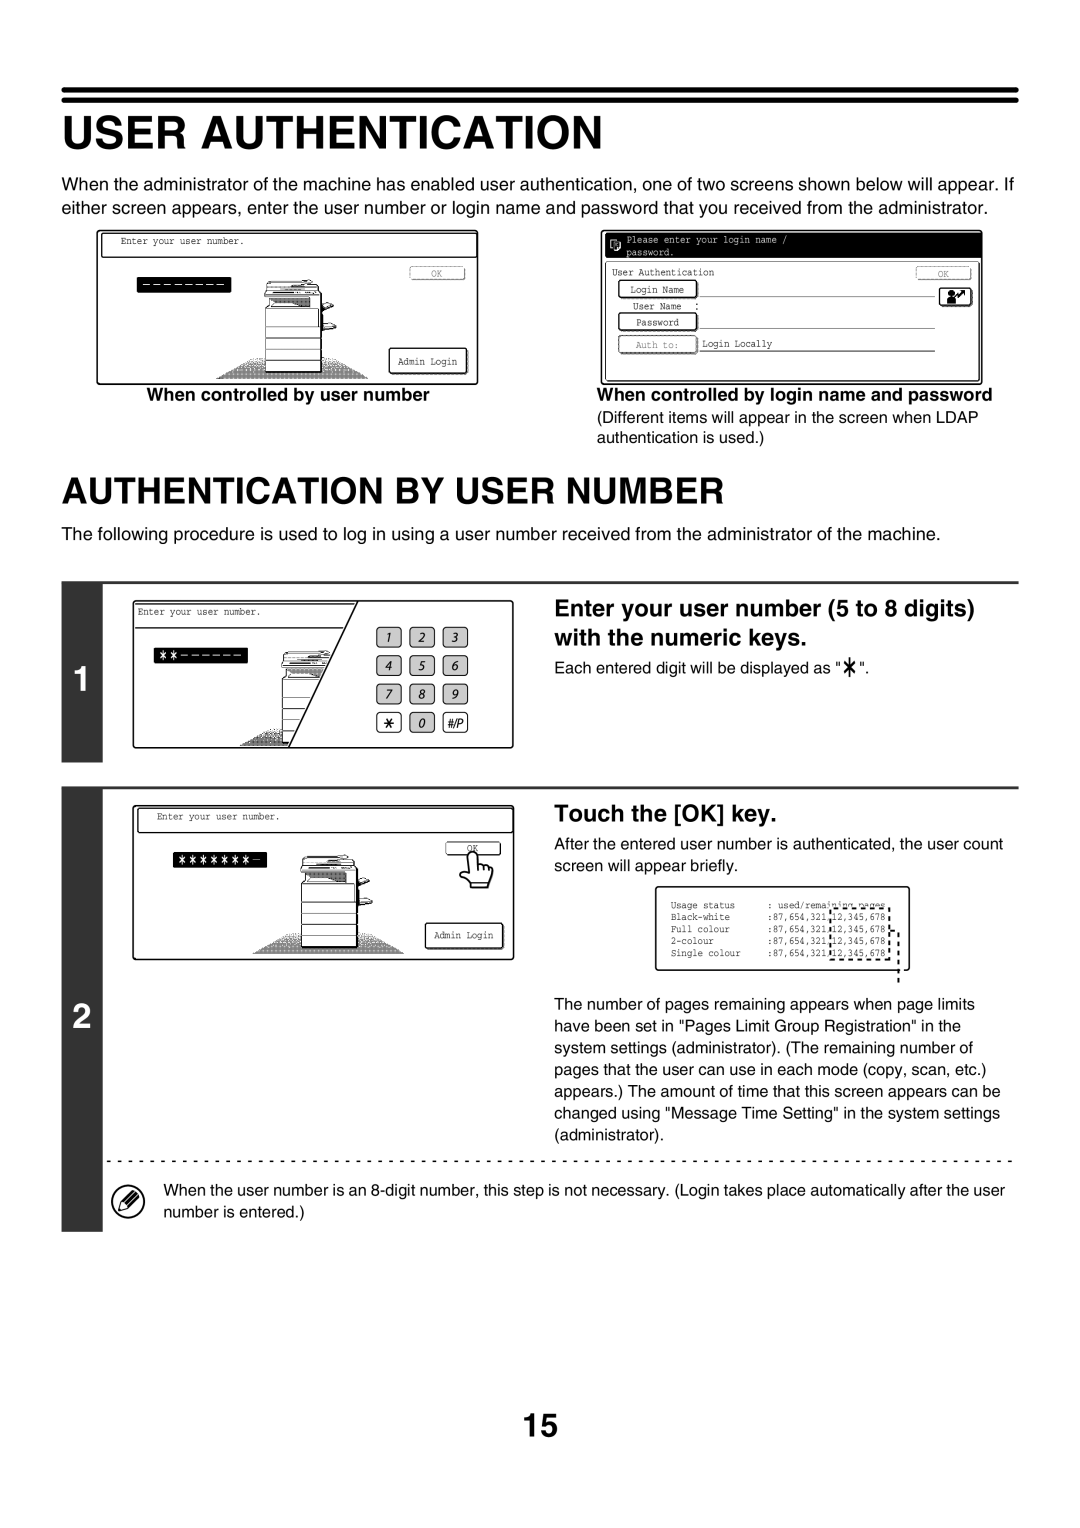 Sharp MX-2300G User Authentication, Authentication By User Number, Enter your user number 5 to 8 digits, Touch the OK key 